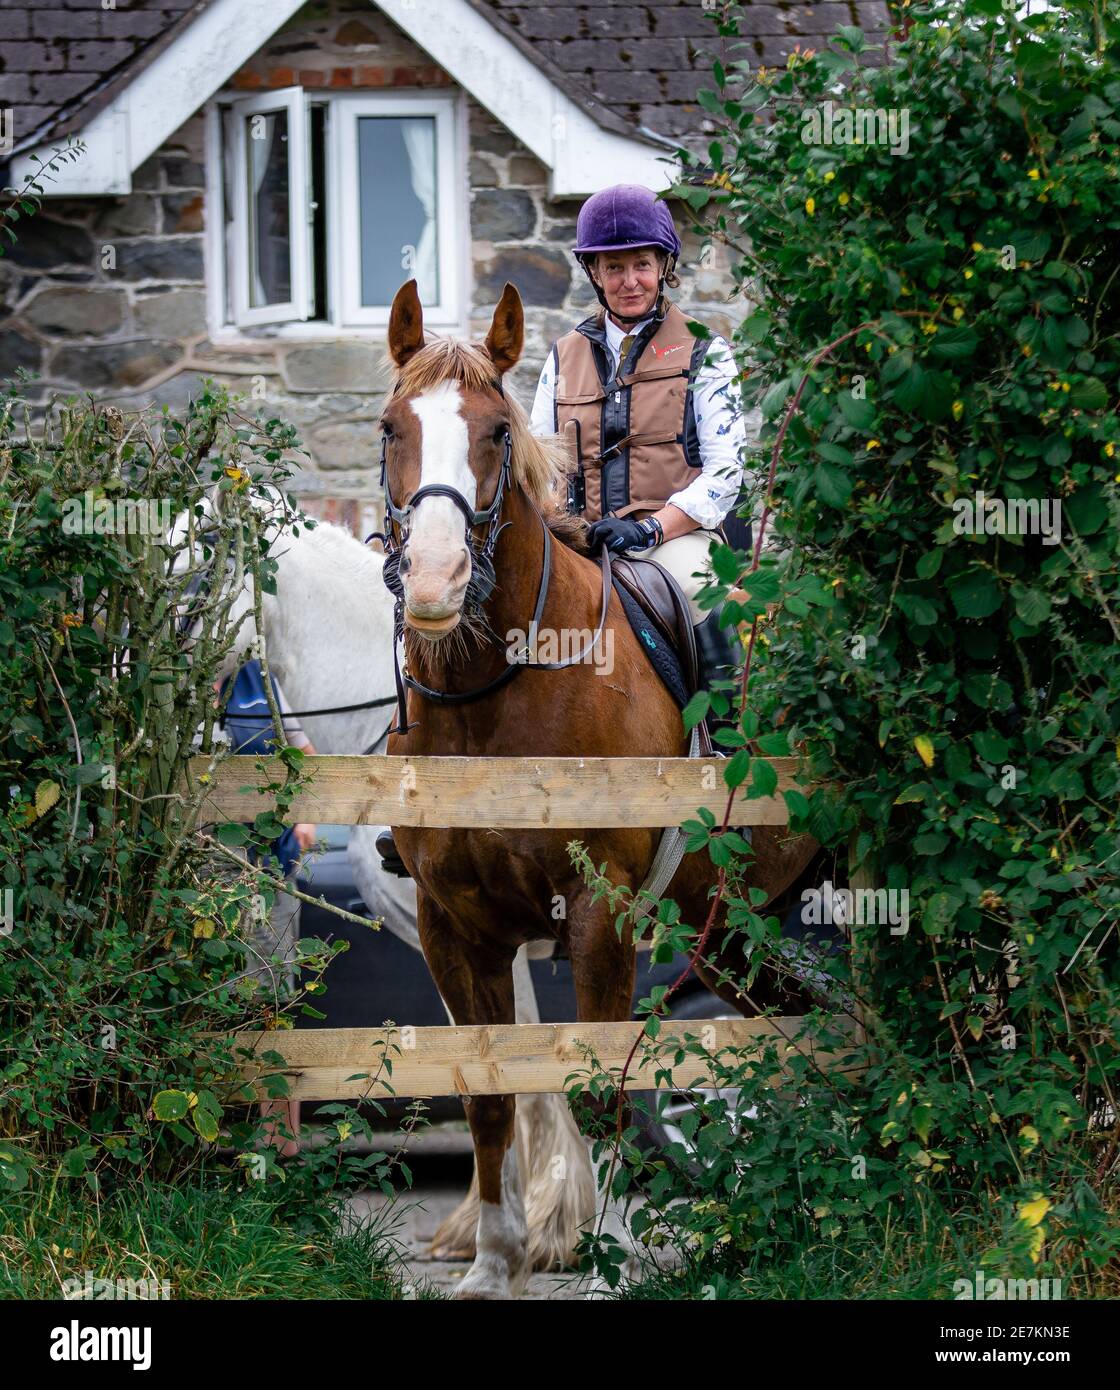 Lady on horse looking over a hedge Stock Photo